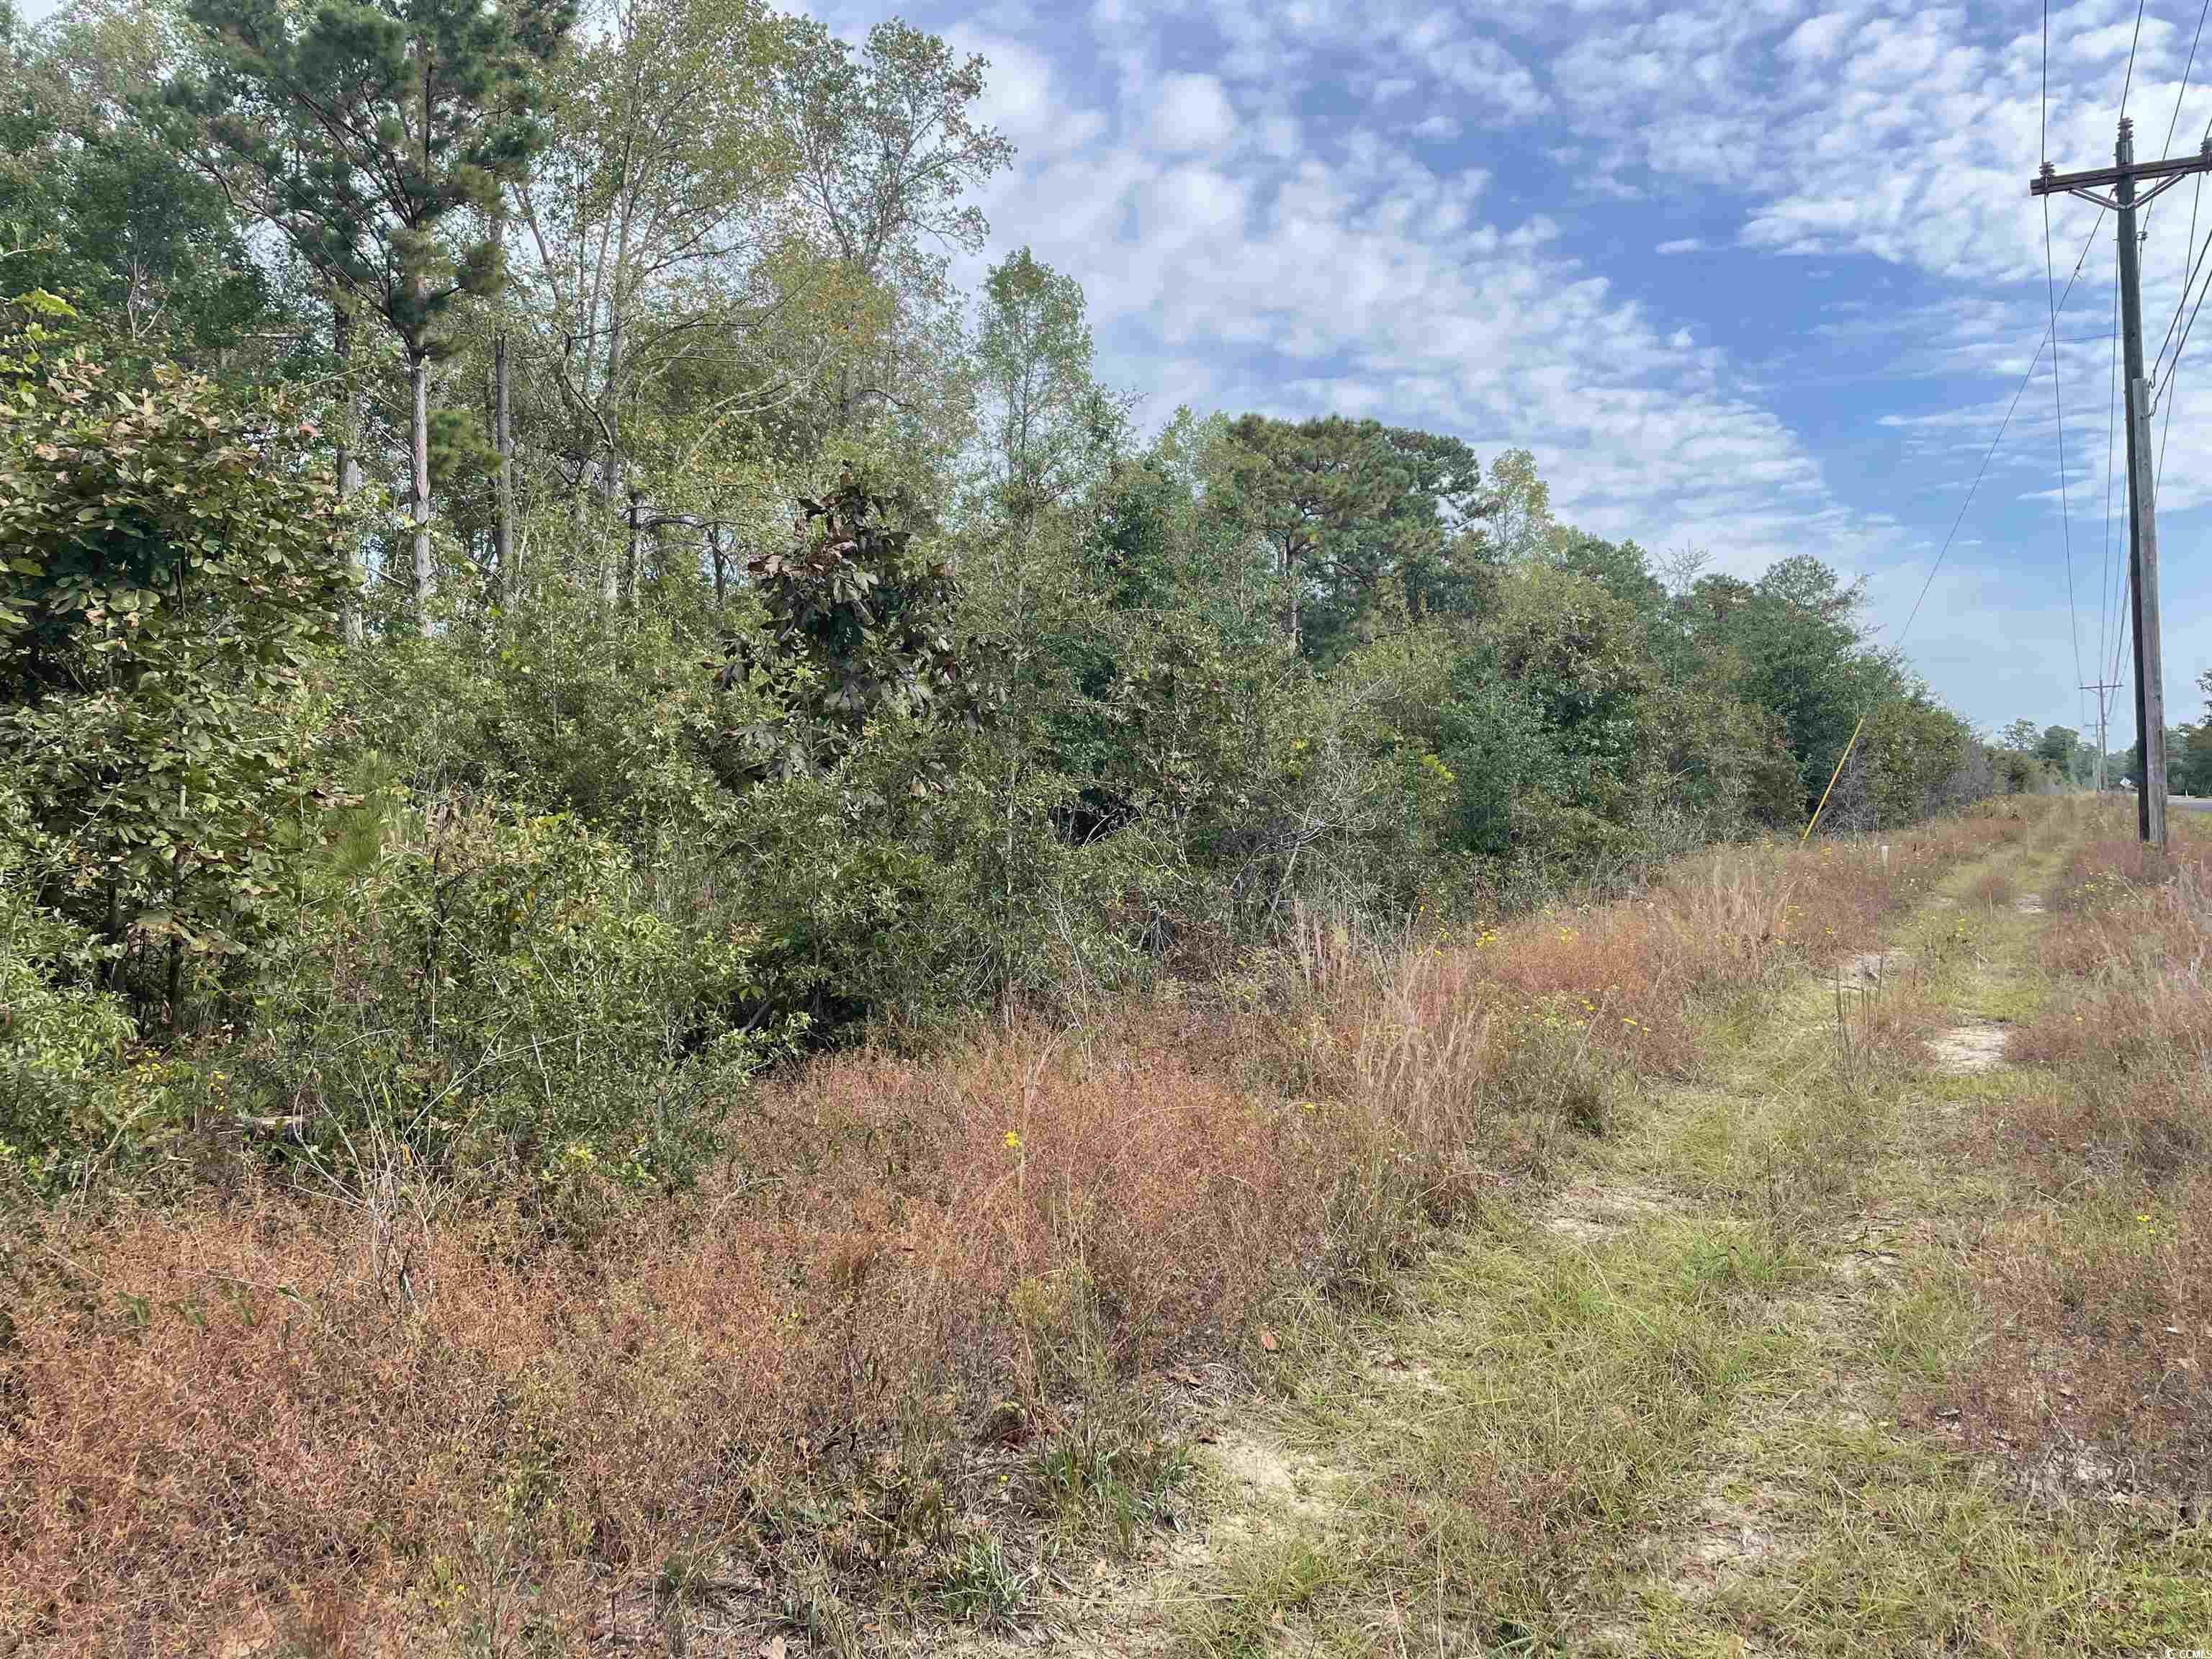 located just minutes from downtown historic georgetown, this 13.6 acres on whitehall ave. has many possibilities.  it is only 1/2 mile from the belle isle marina and yacht club, that includes access to winyah bay and the intracoastal waterway. additional acreage is available.